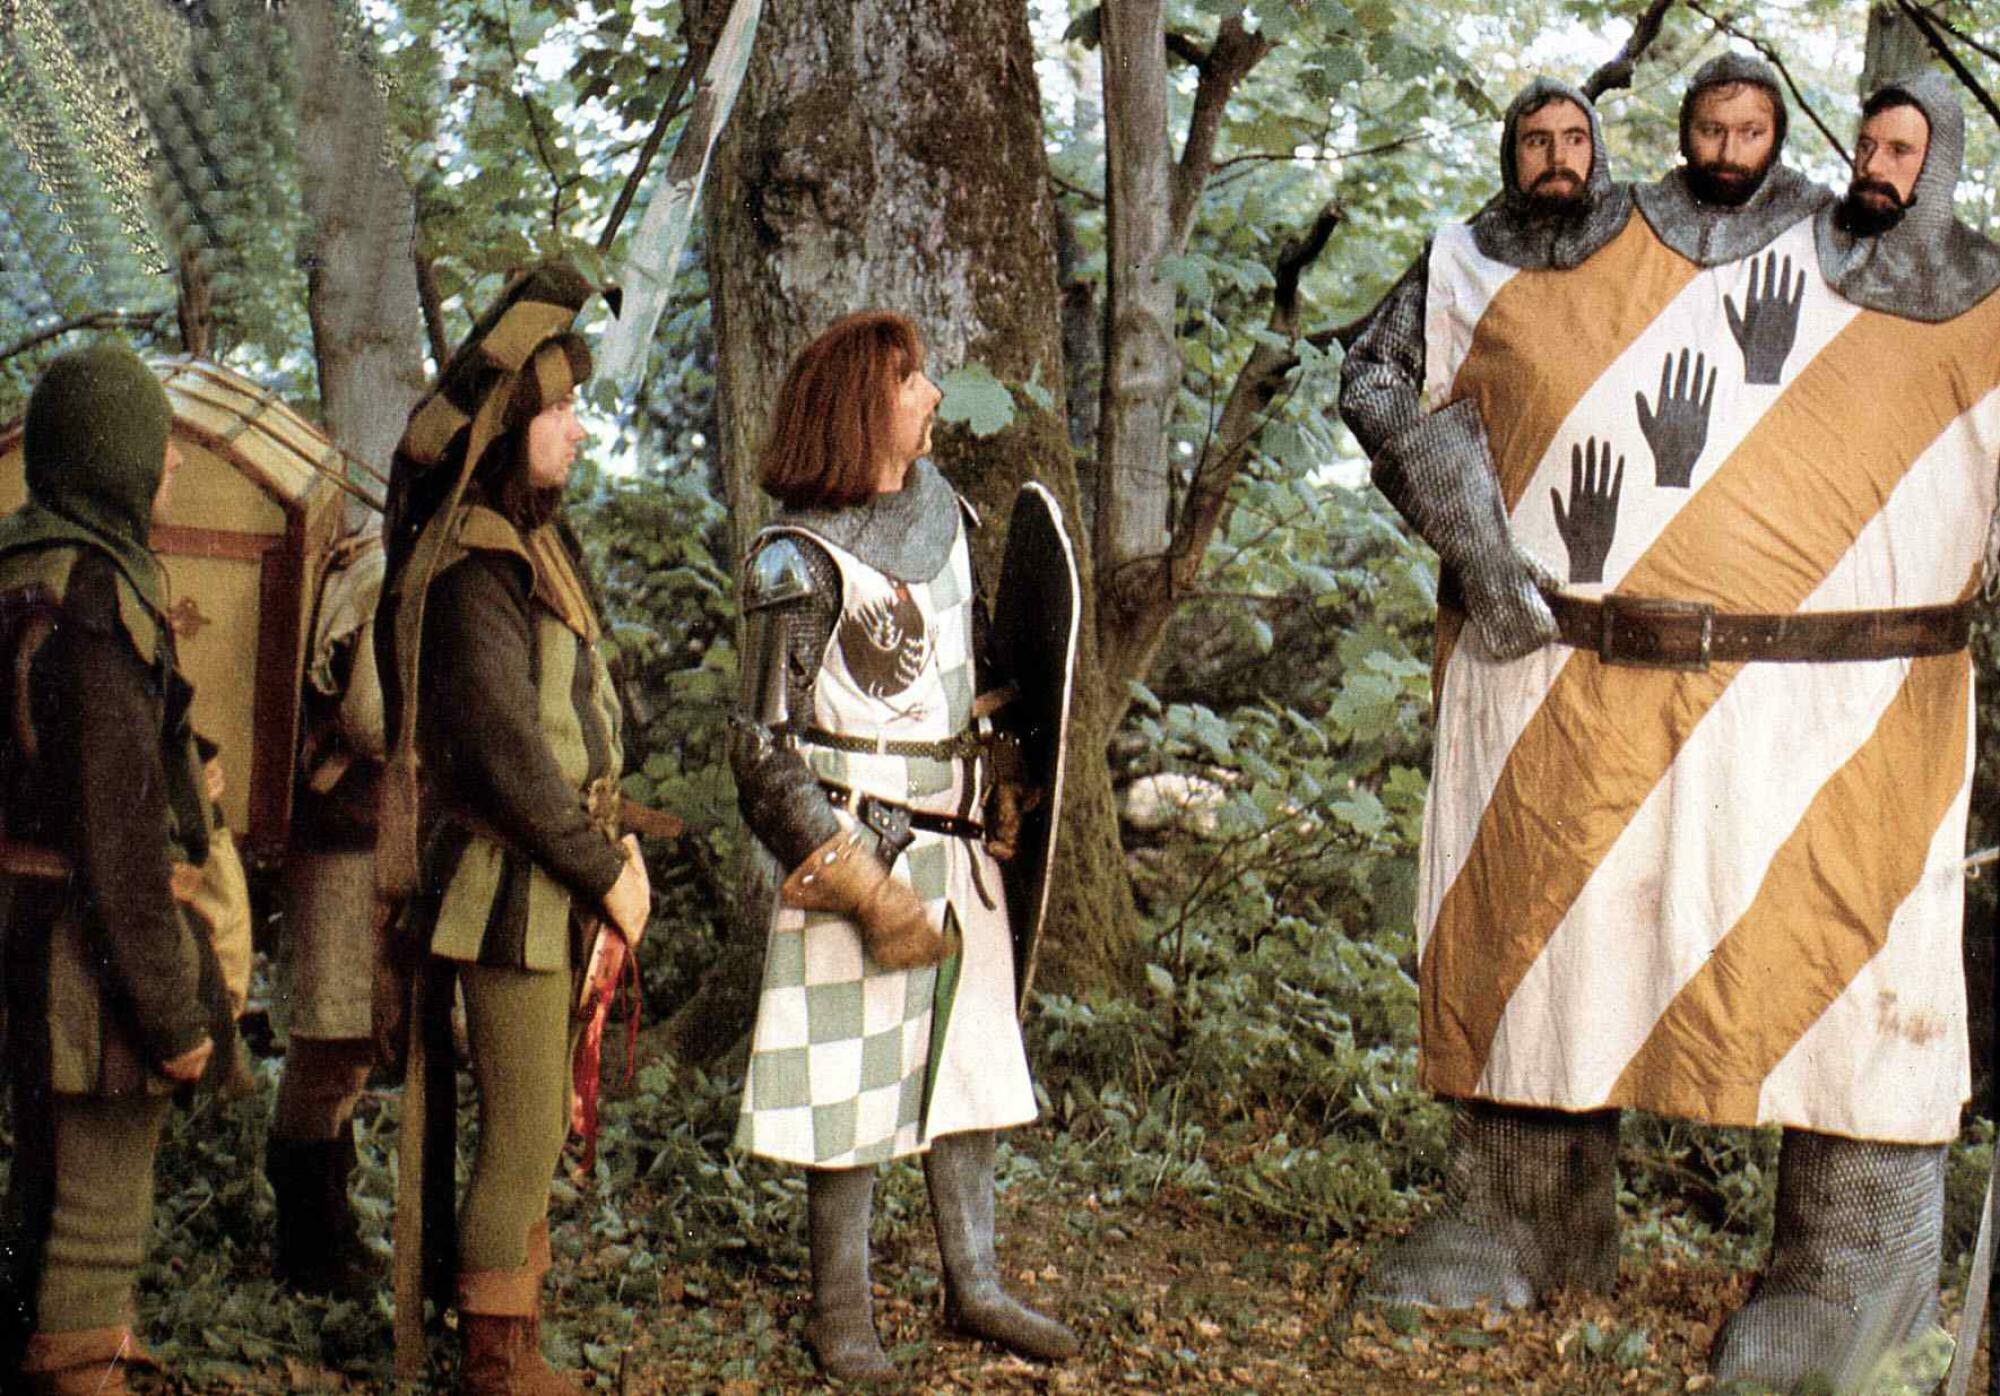 Monty Python in a scene of ridiculous knights. 